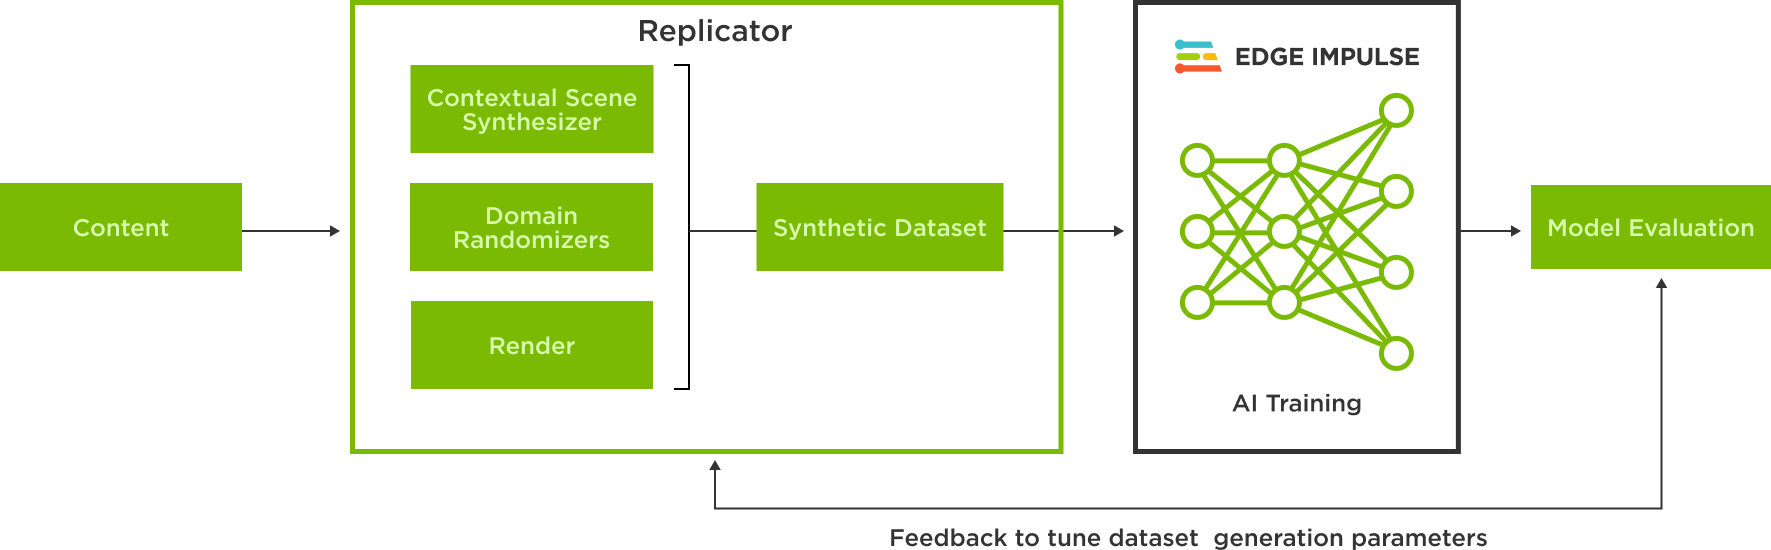 A diagram showing the workflow from content in Omniverse being used to generate synthetic datasets in Replicator, which can then be used for AI training with Edge Impulse.